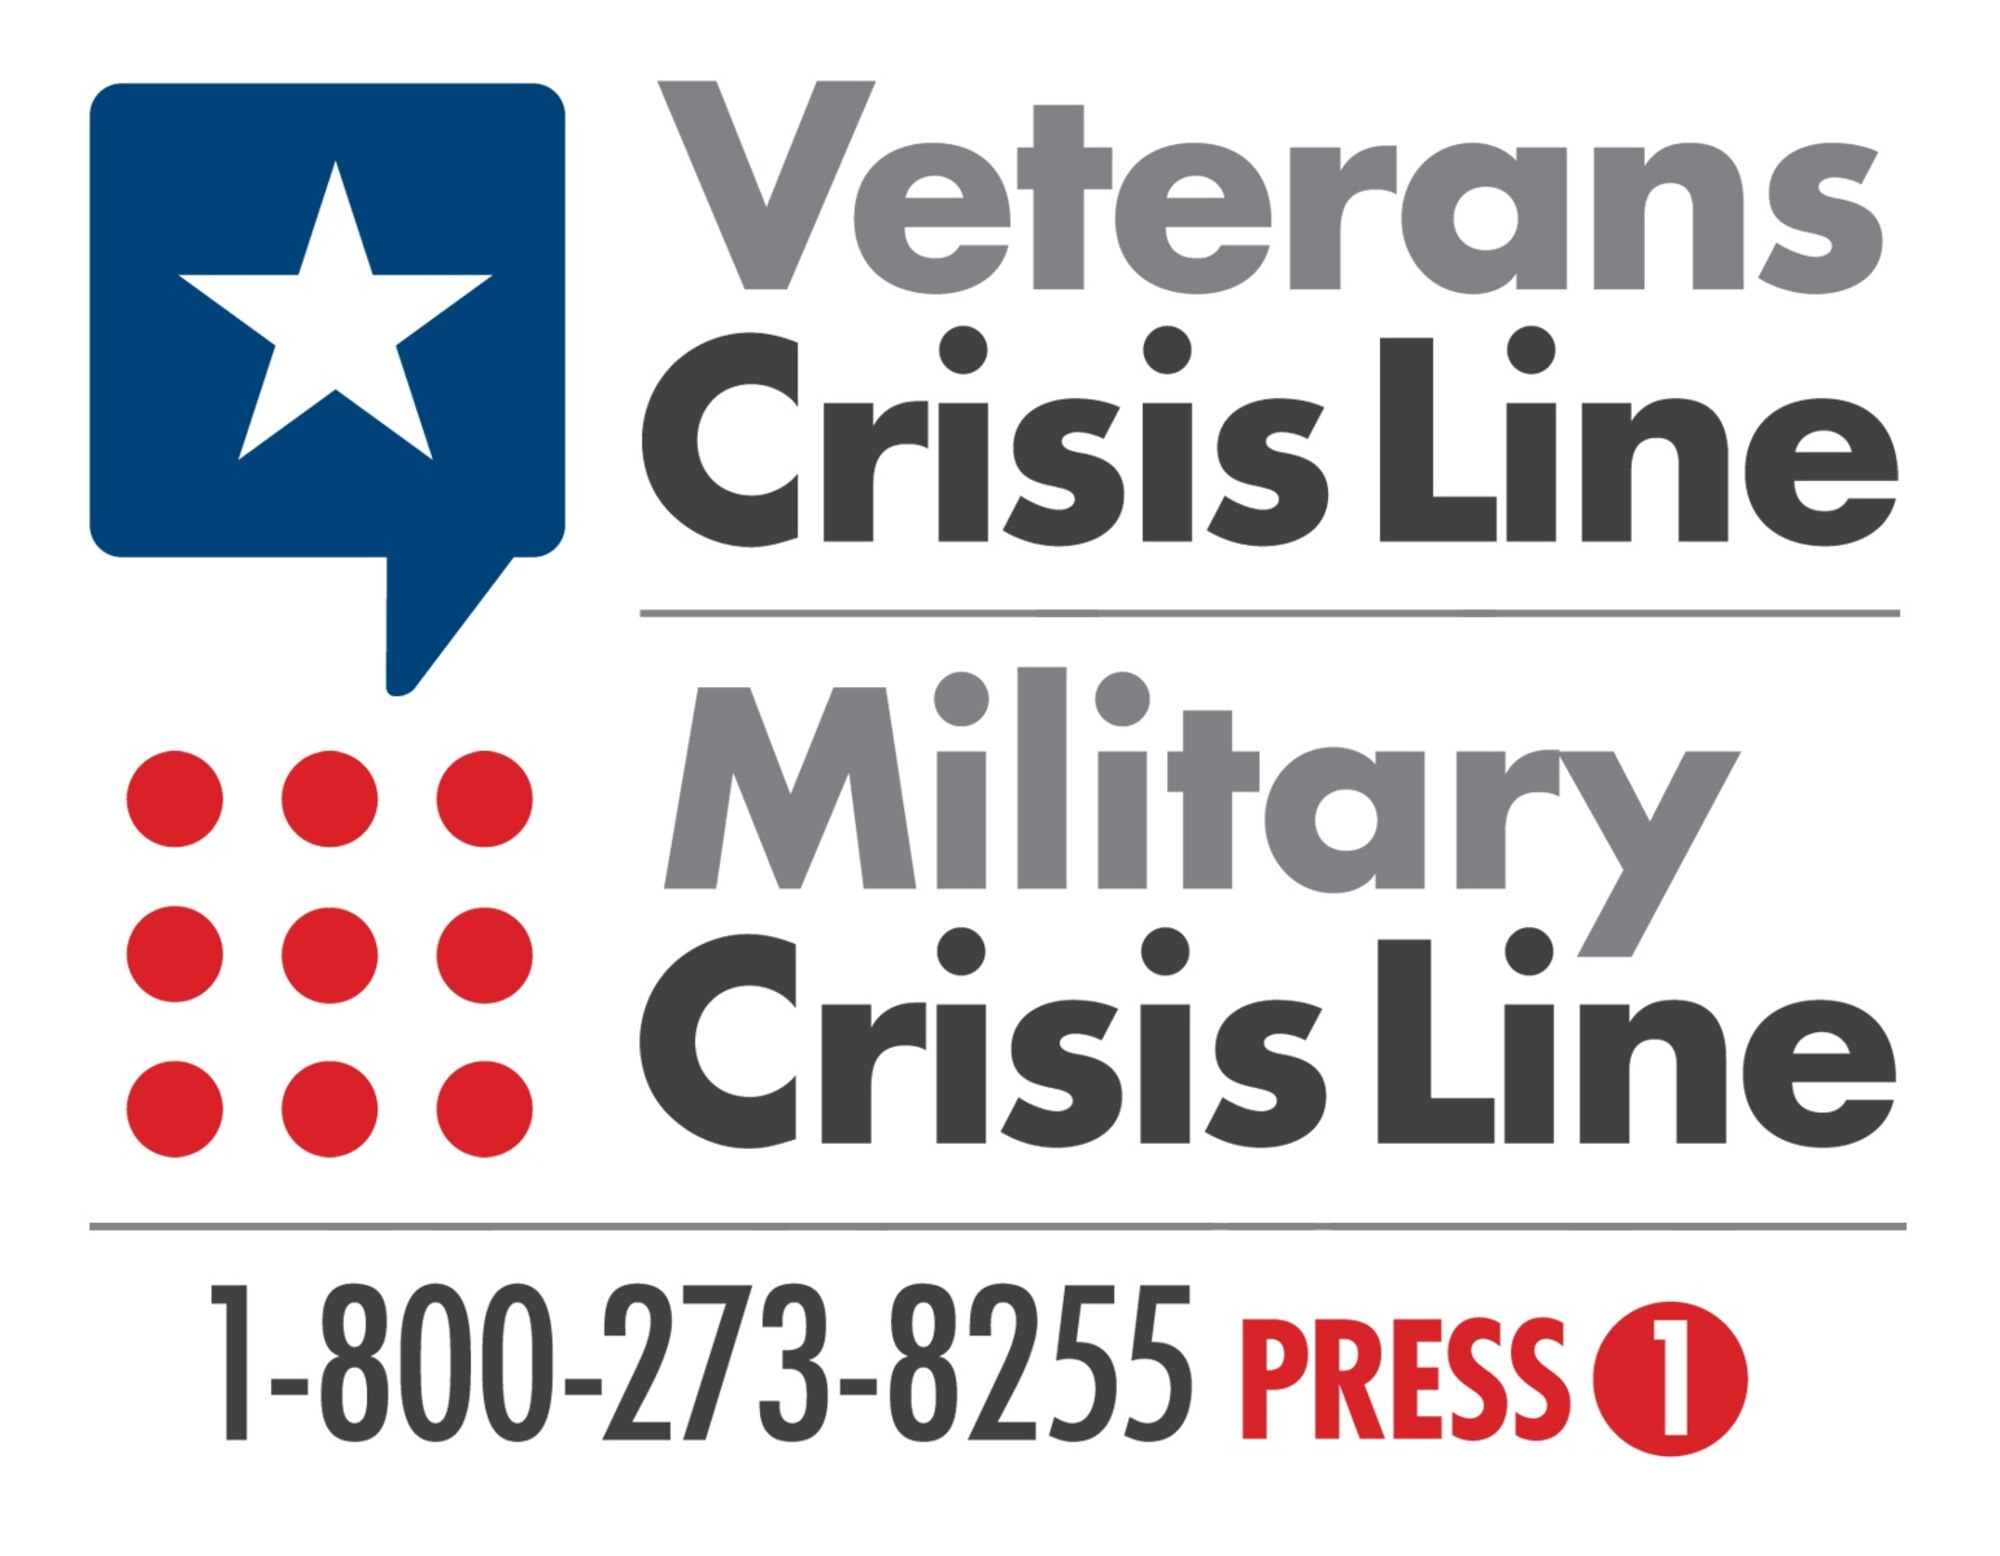 The Veterans and Military Crisis Line number is 1-800-273-8255, then press 1.